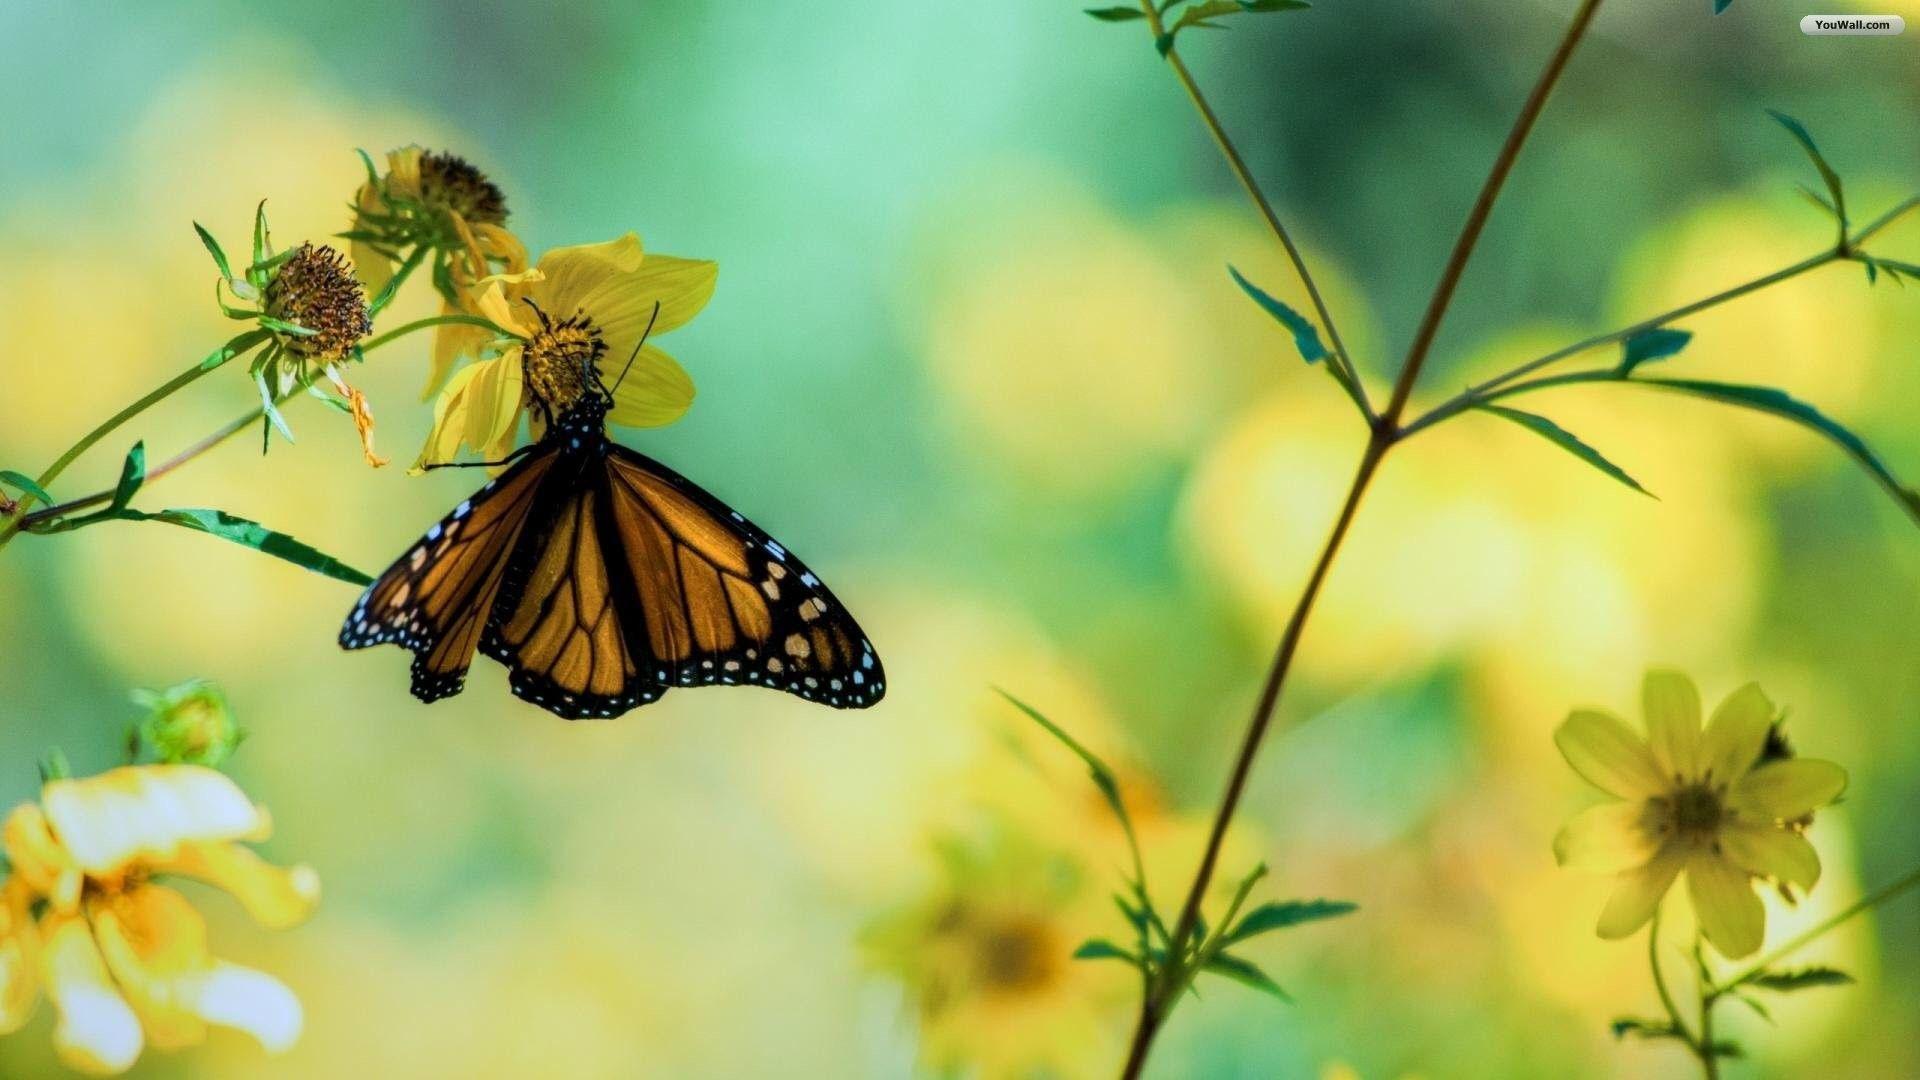 Butterfly and Flower Wallpaper background picture